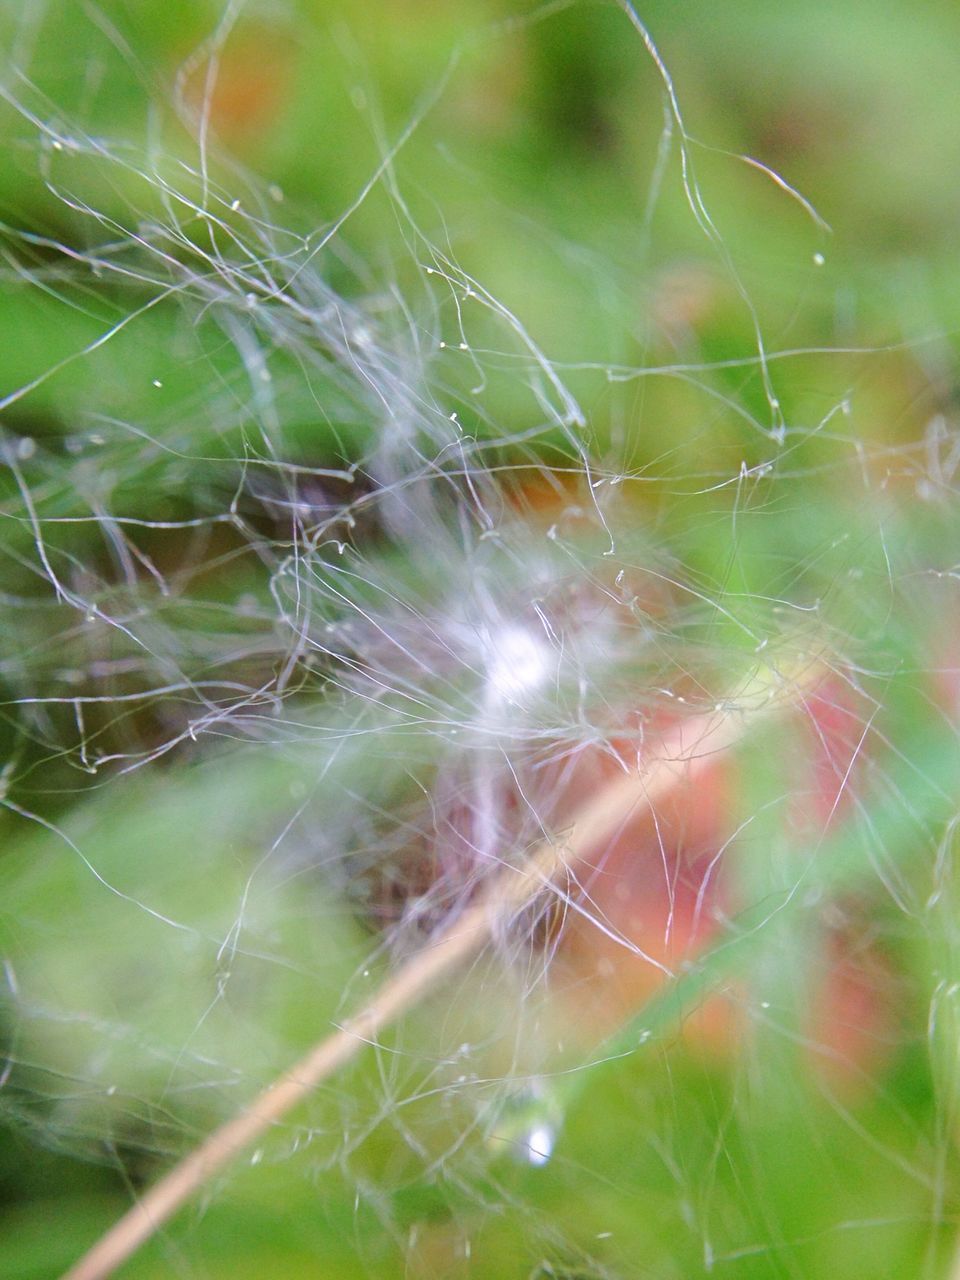 spider web, focus on foreground, drop, fragility, close-up, wet, nature, water, dew, beauty in nature, natural pattern, day, selective focus, outdoors, plant, freshness, growth, spider, web, grass